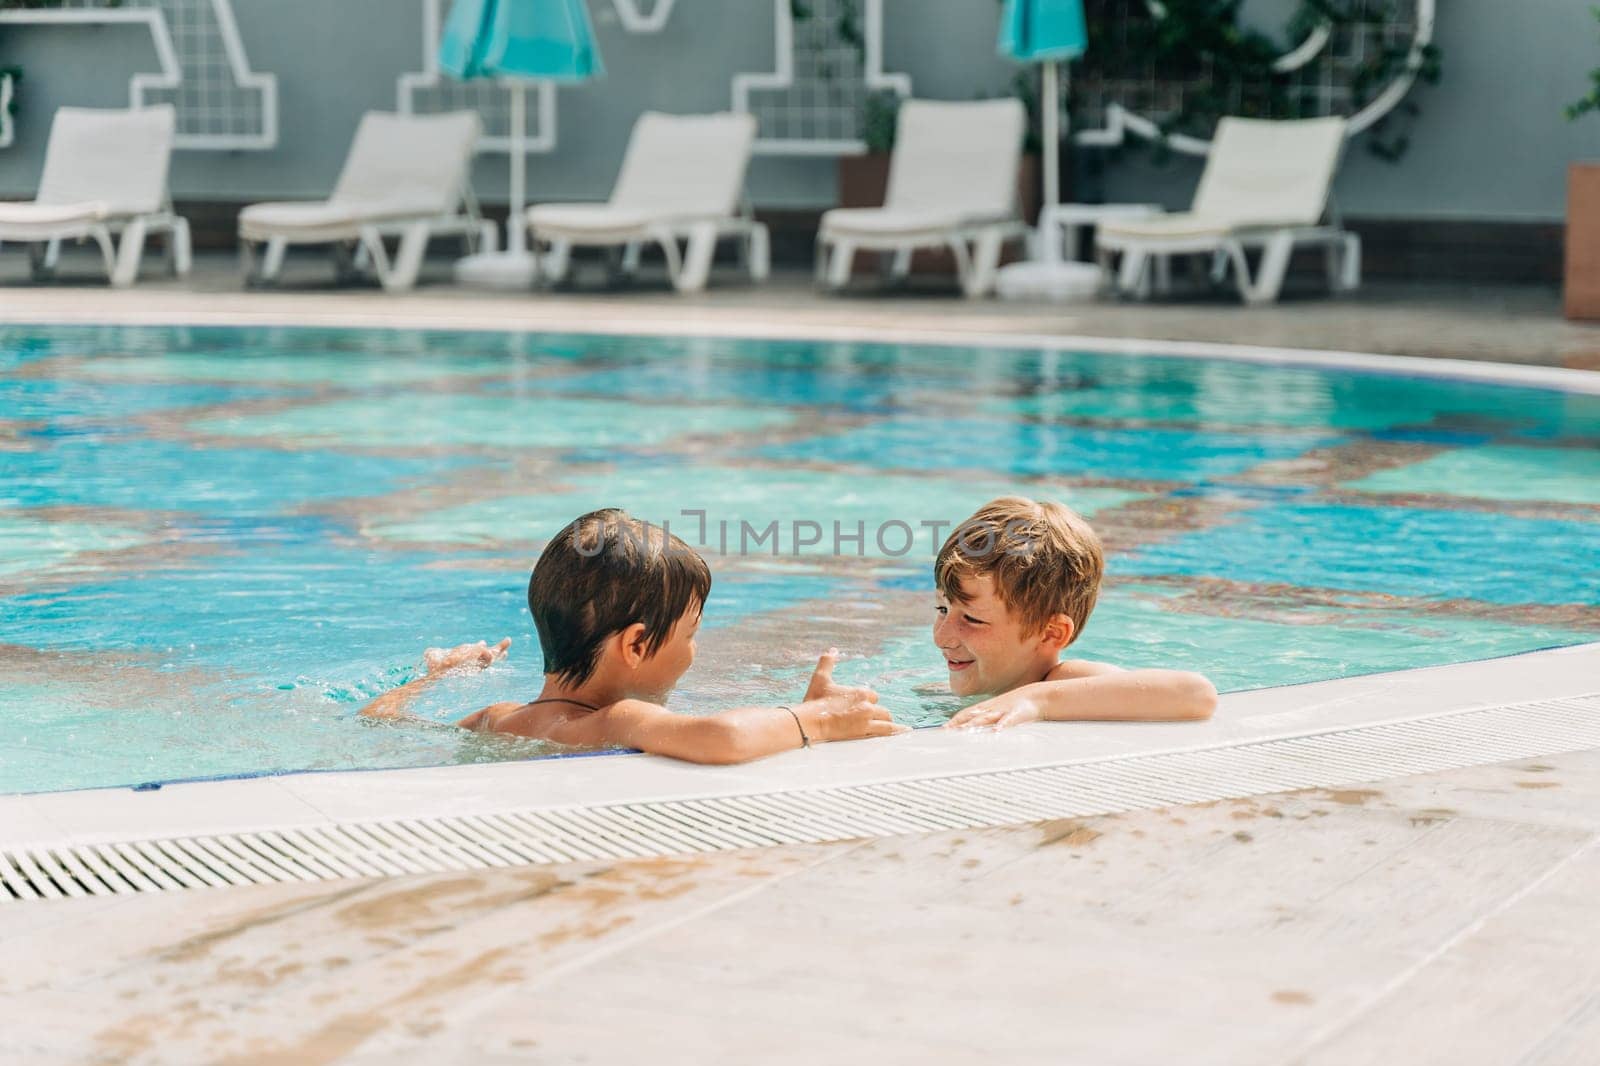 Two brothers Childs laughing while playing in swimming pool at sunny day. Kids friends boys refreshing at heat weather, active vacation and healthy lifestyle. Happy summer.